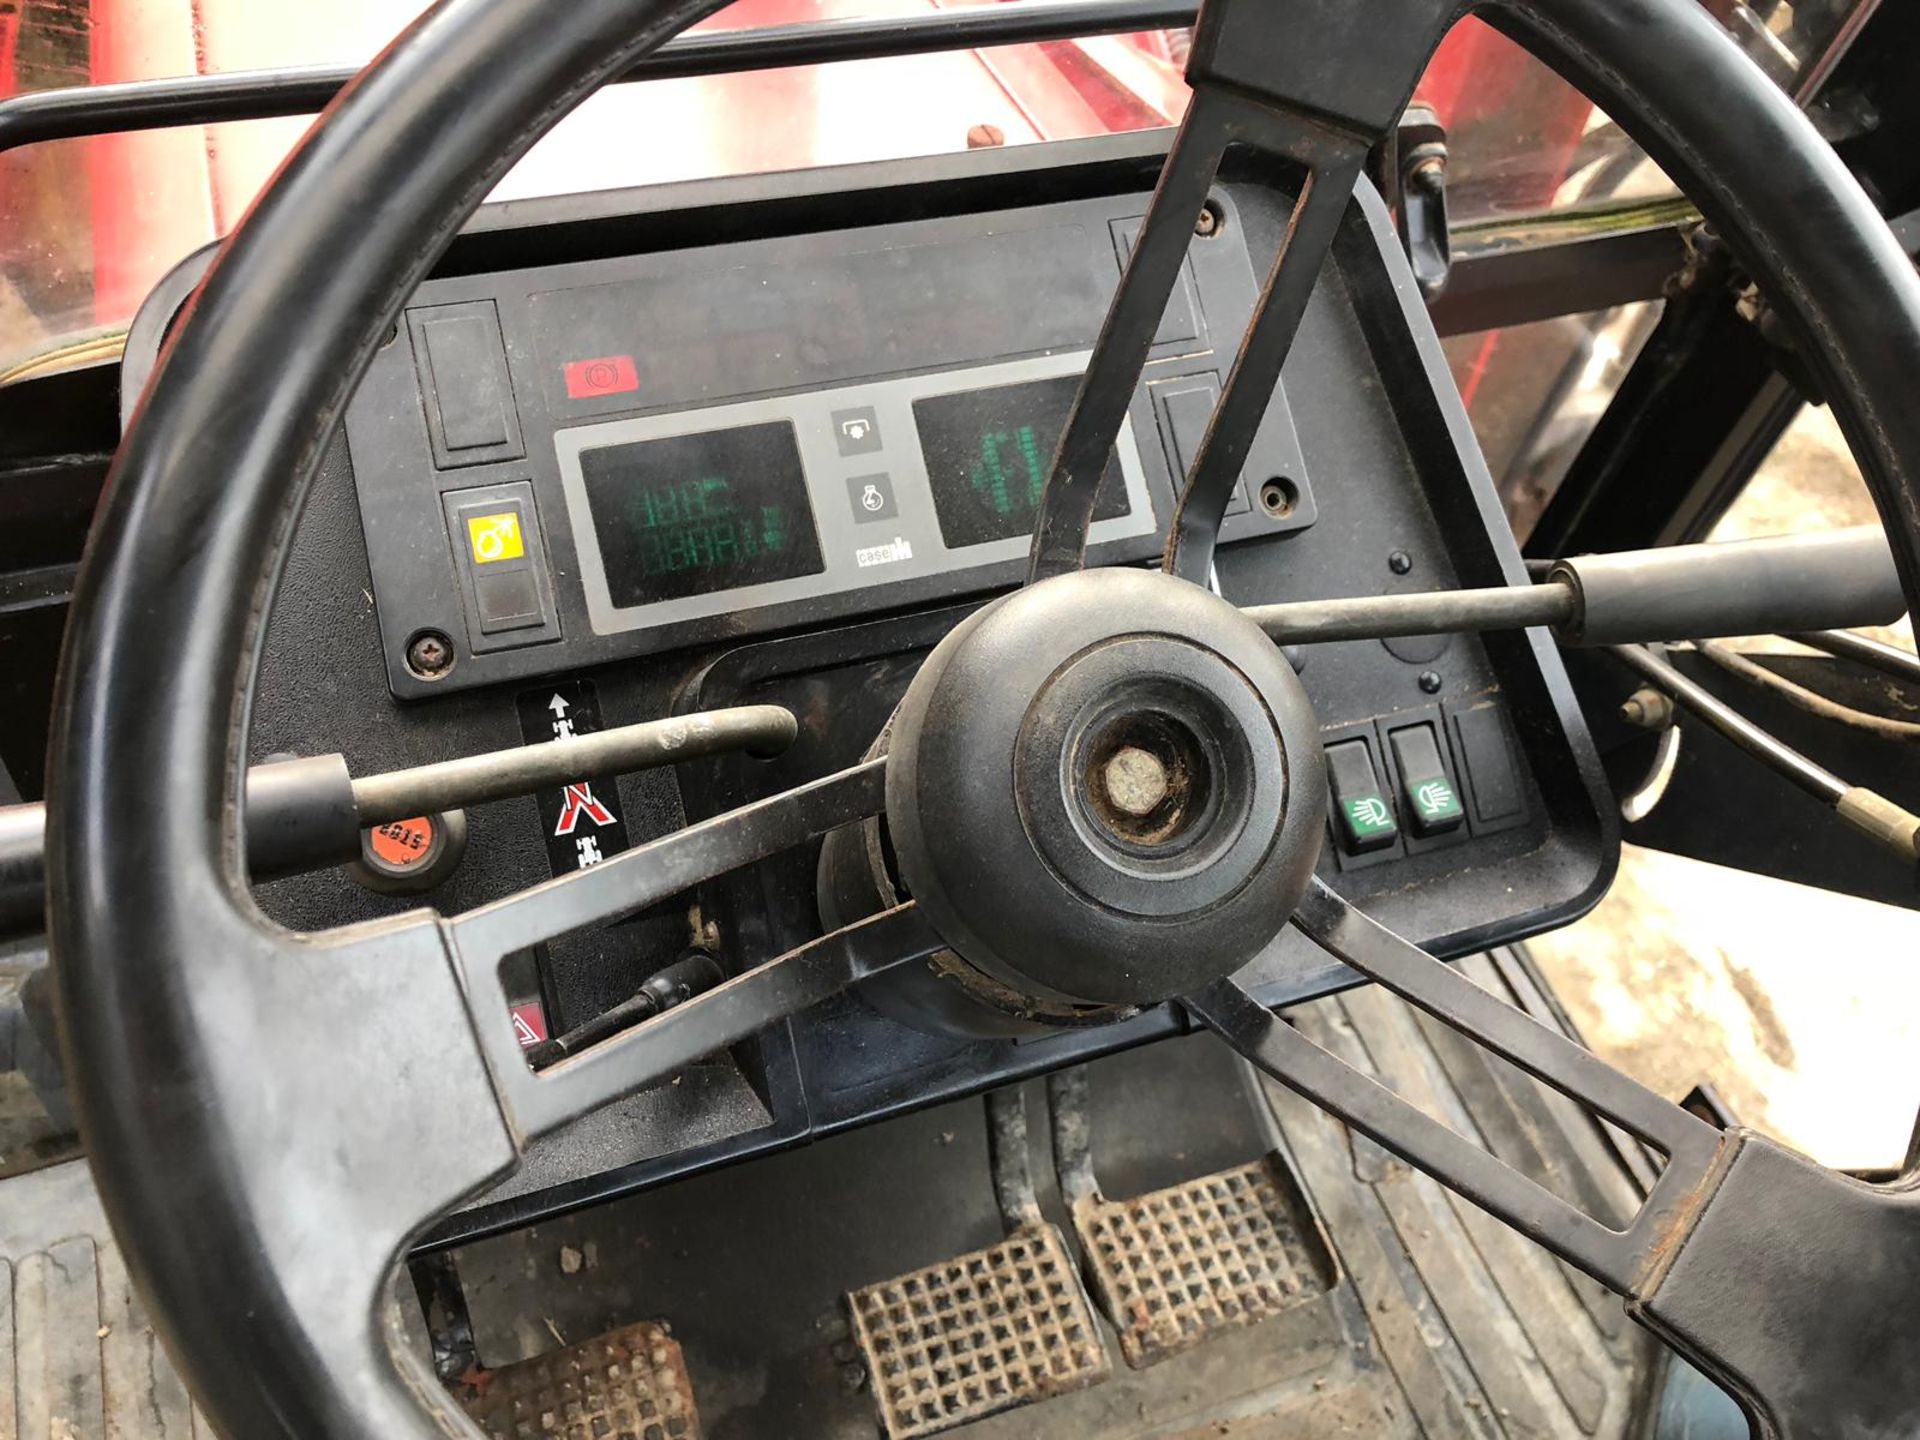 1996/P REG CASE IH 4230 DIESEL TRACTOR WITH CHILLTON MX 40-70 SPIKED LOADER *PLUS VAT* - Image 17 of 23